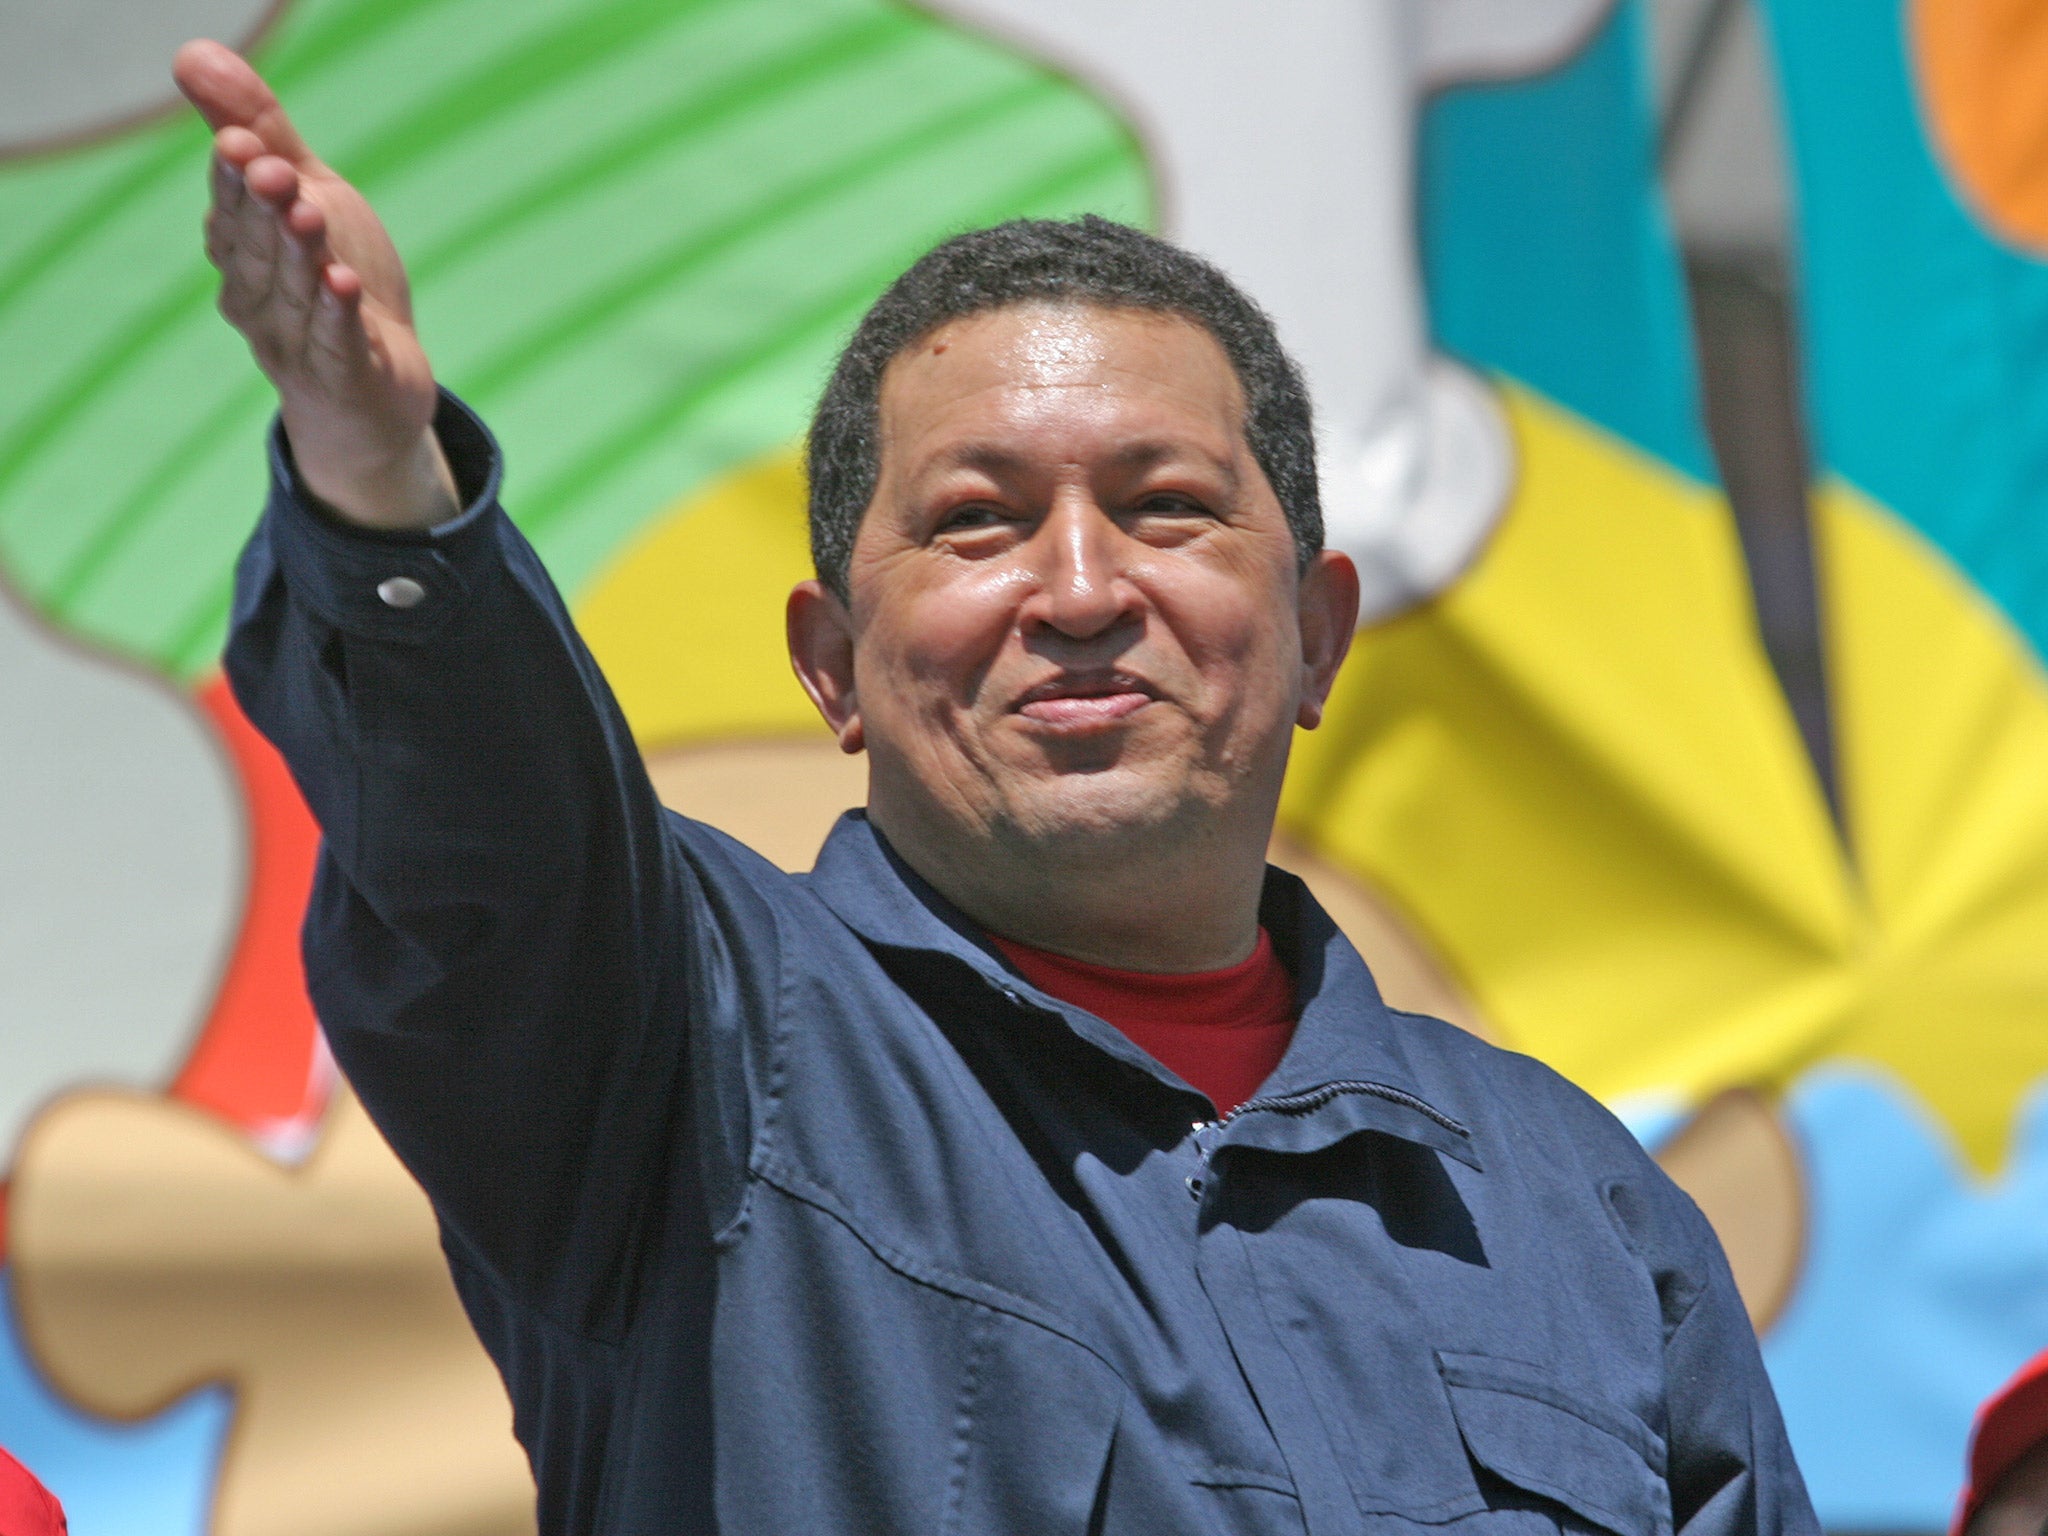 Chavez salutes the crowd at a summit in 2007